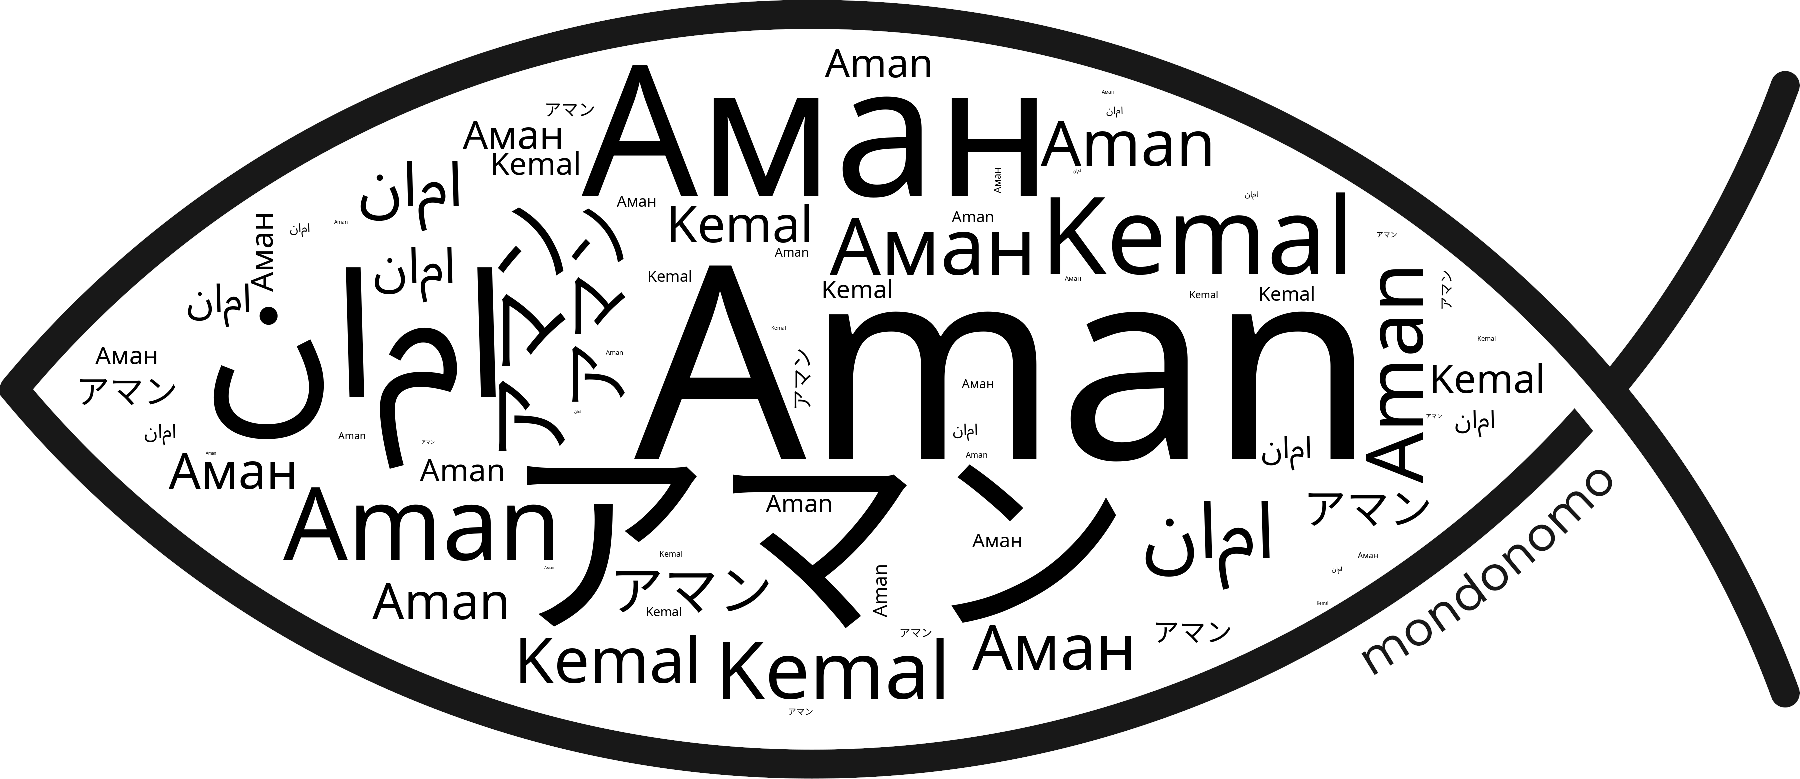 Name Aman in the world's Bibles